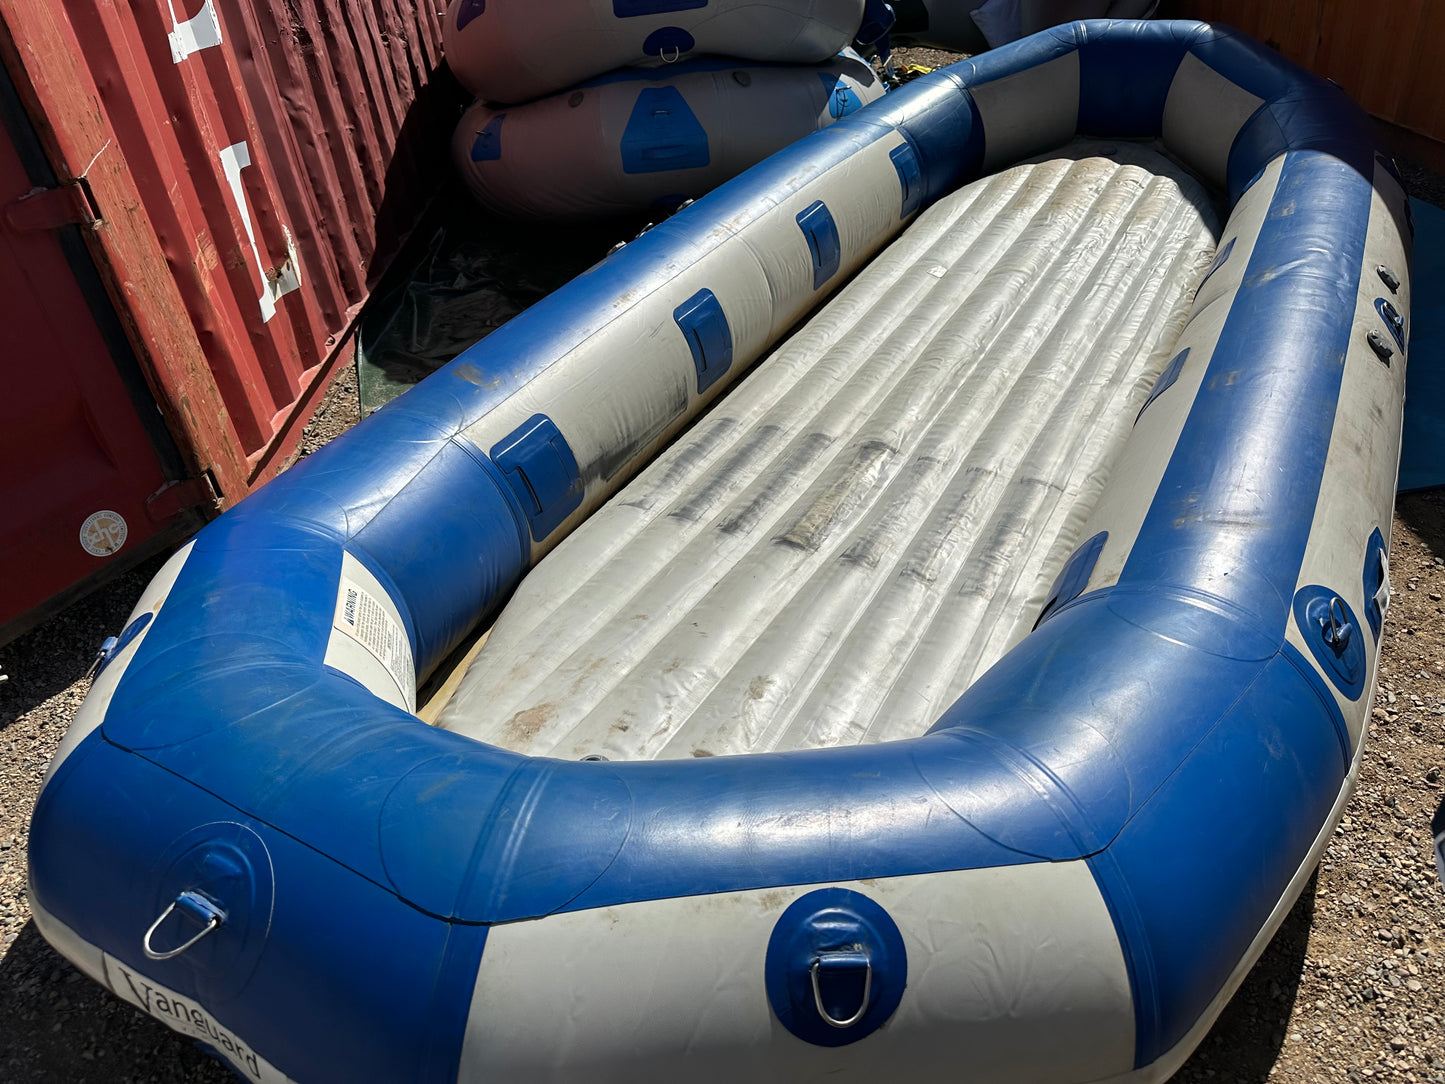 A Used 2006 16' Vanguard raft in fair condition sitting on the ground. (Brand: 4CRS)